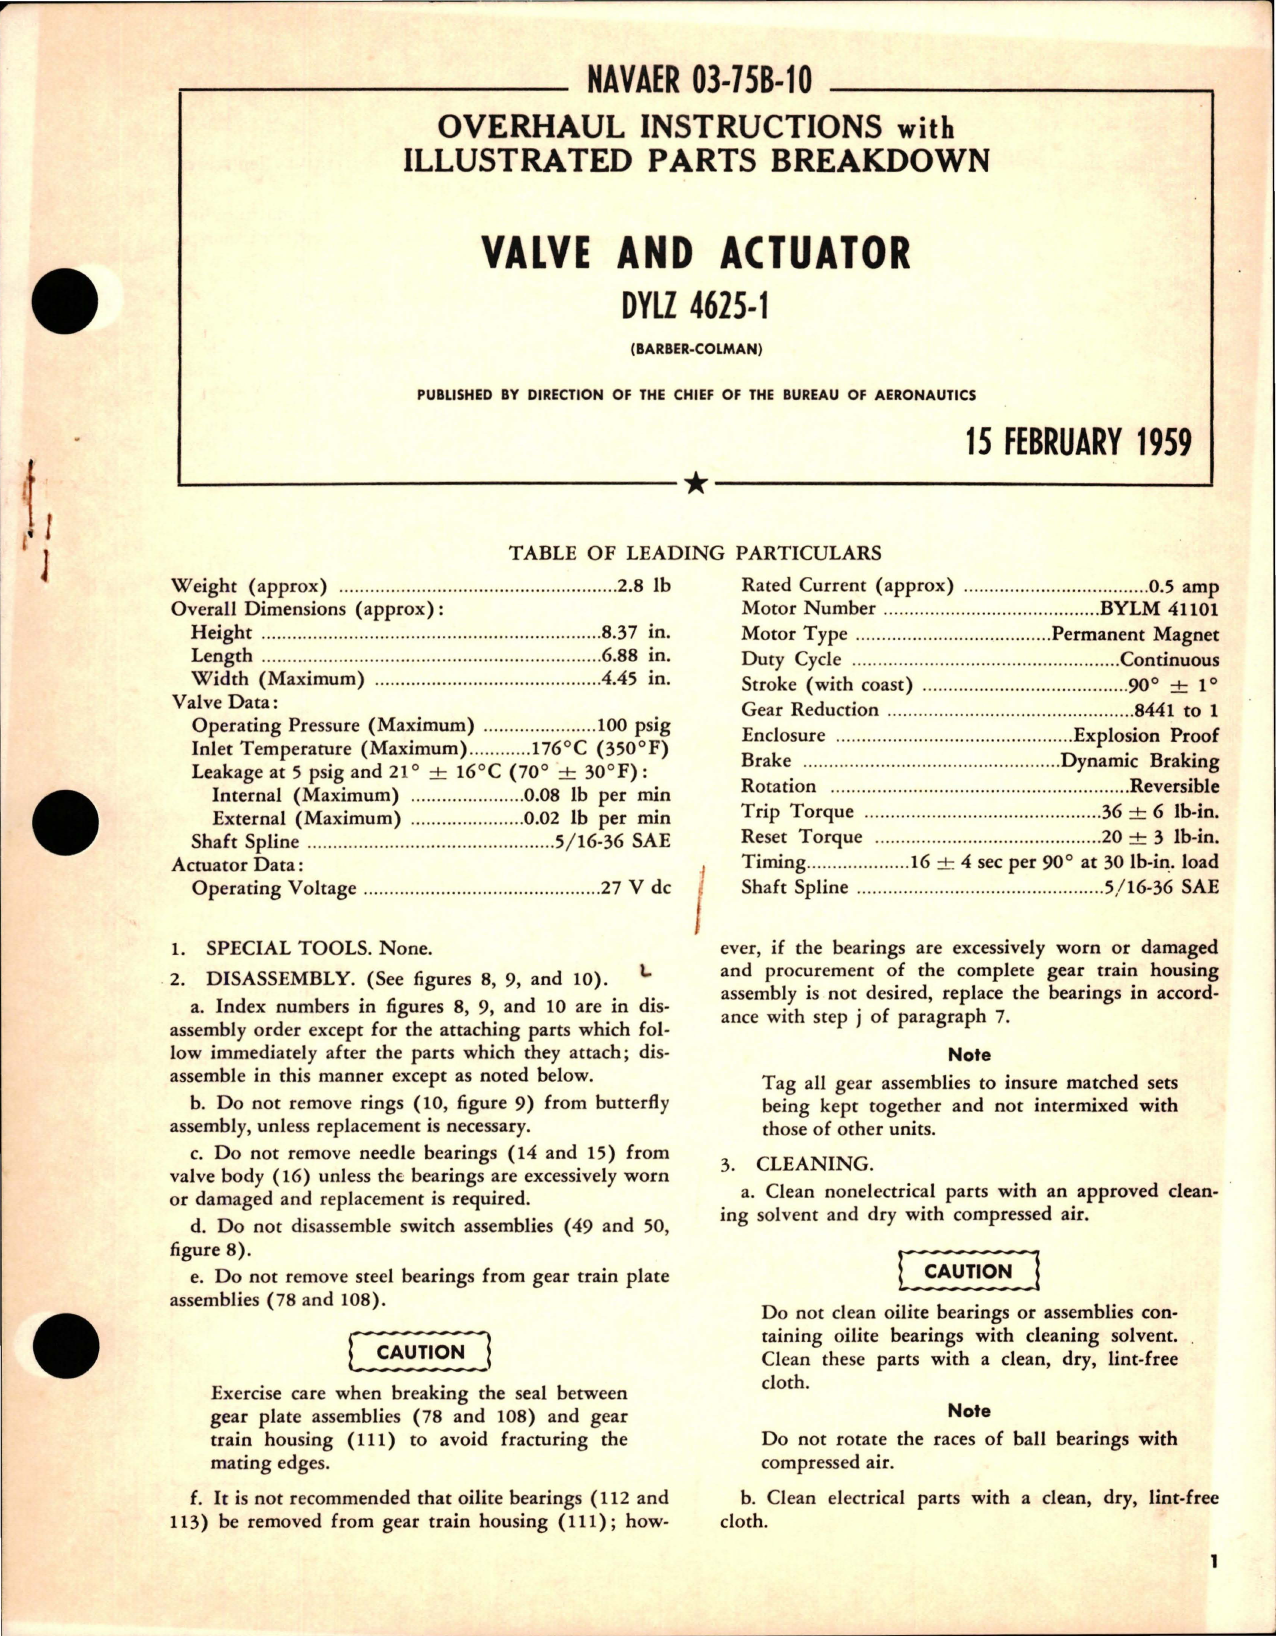 Sample page 1 from AirCorps Library document: Overhaul Instructions with Illustrated Parts Breakdown for Valve and Actuator - DYLZ 4625-1